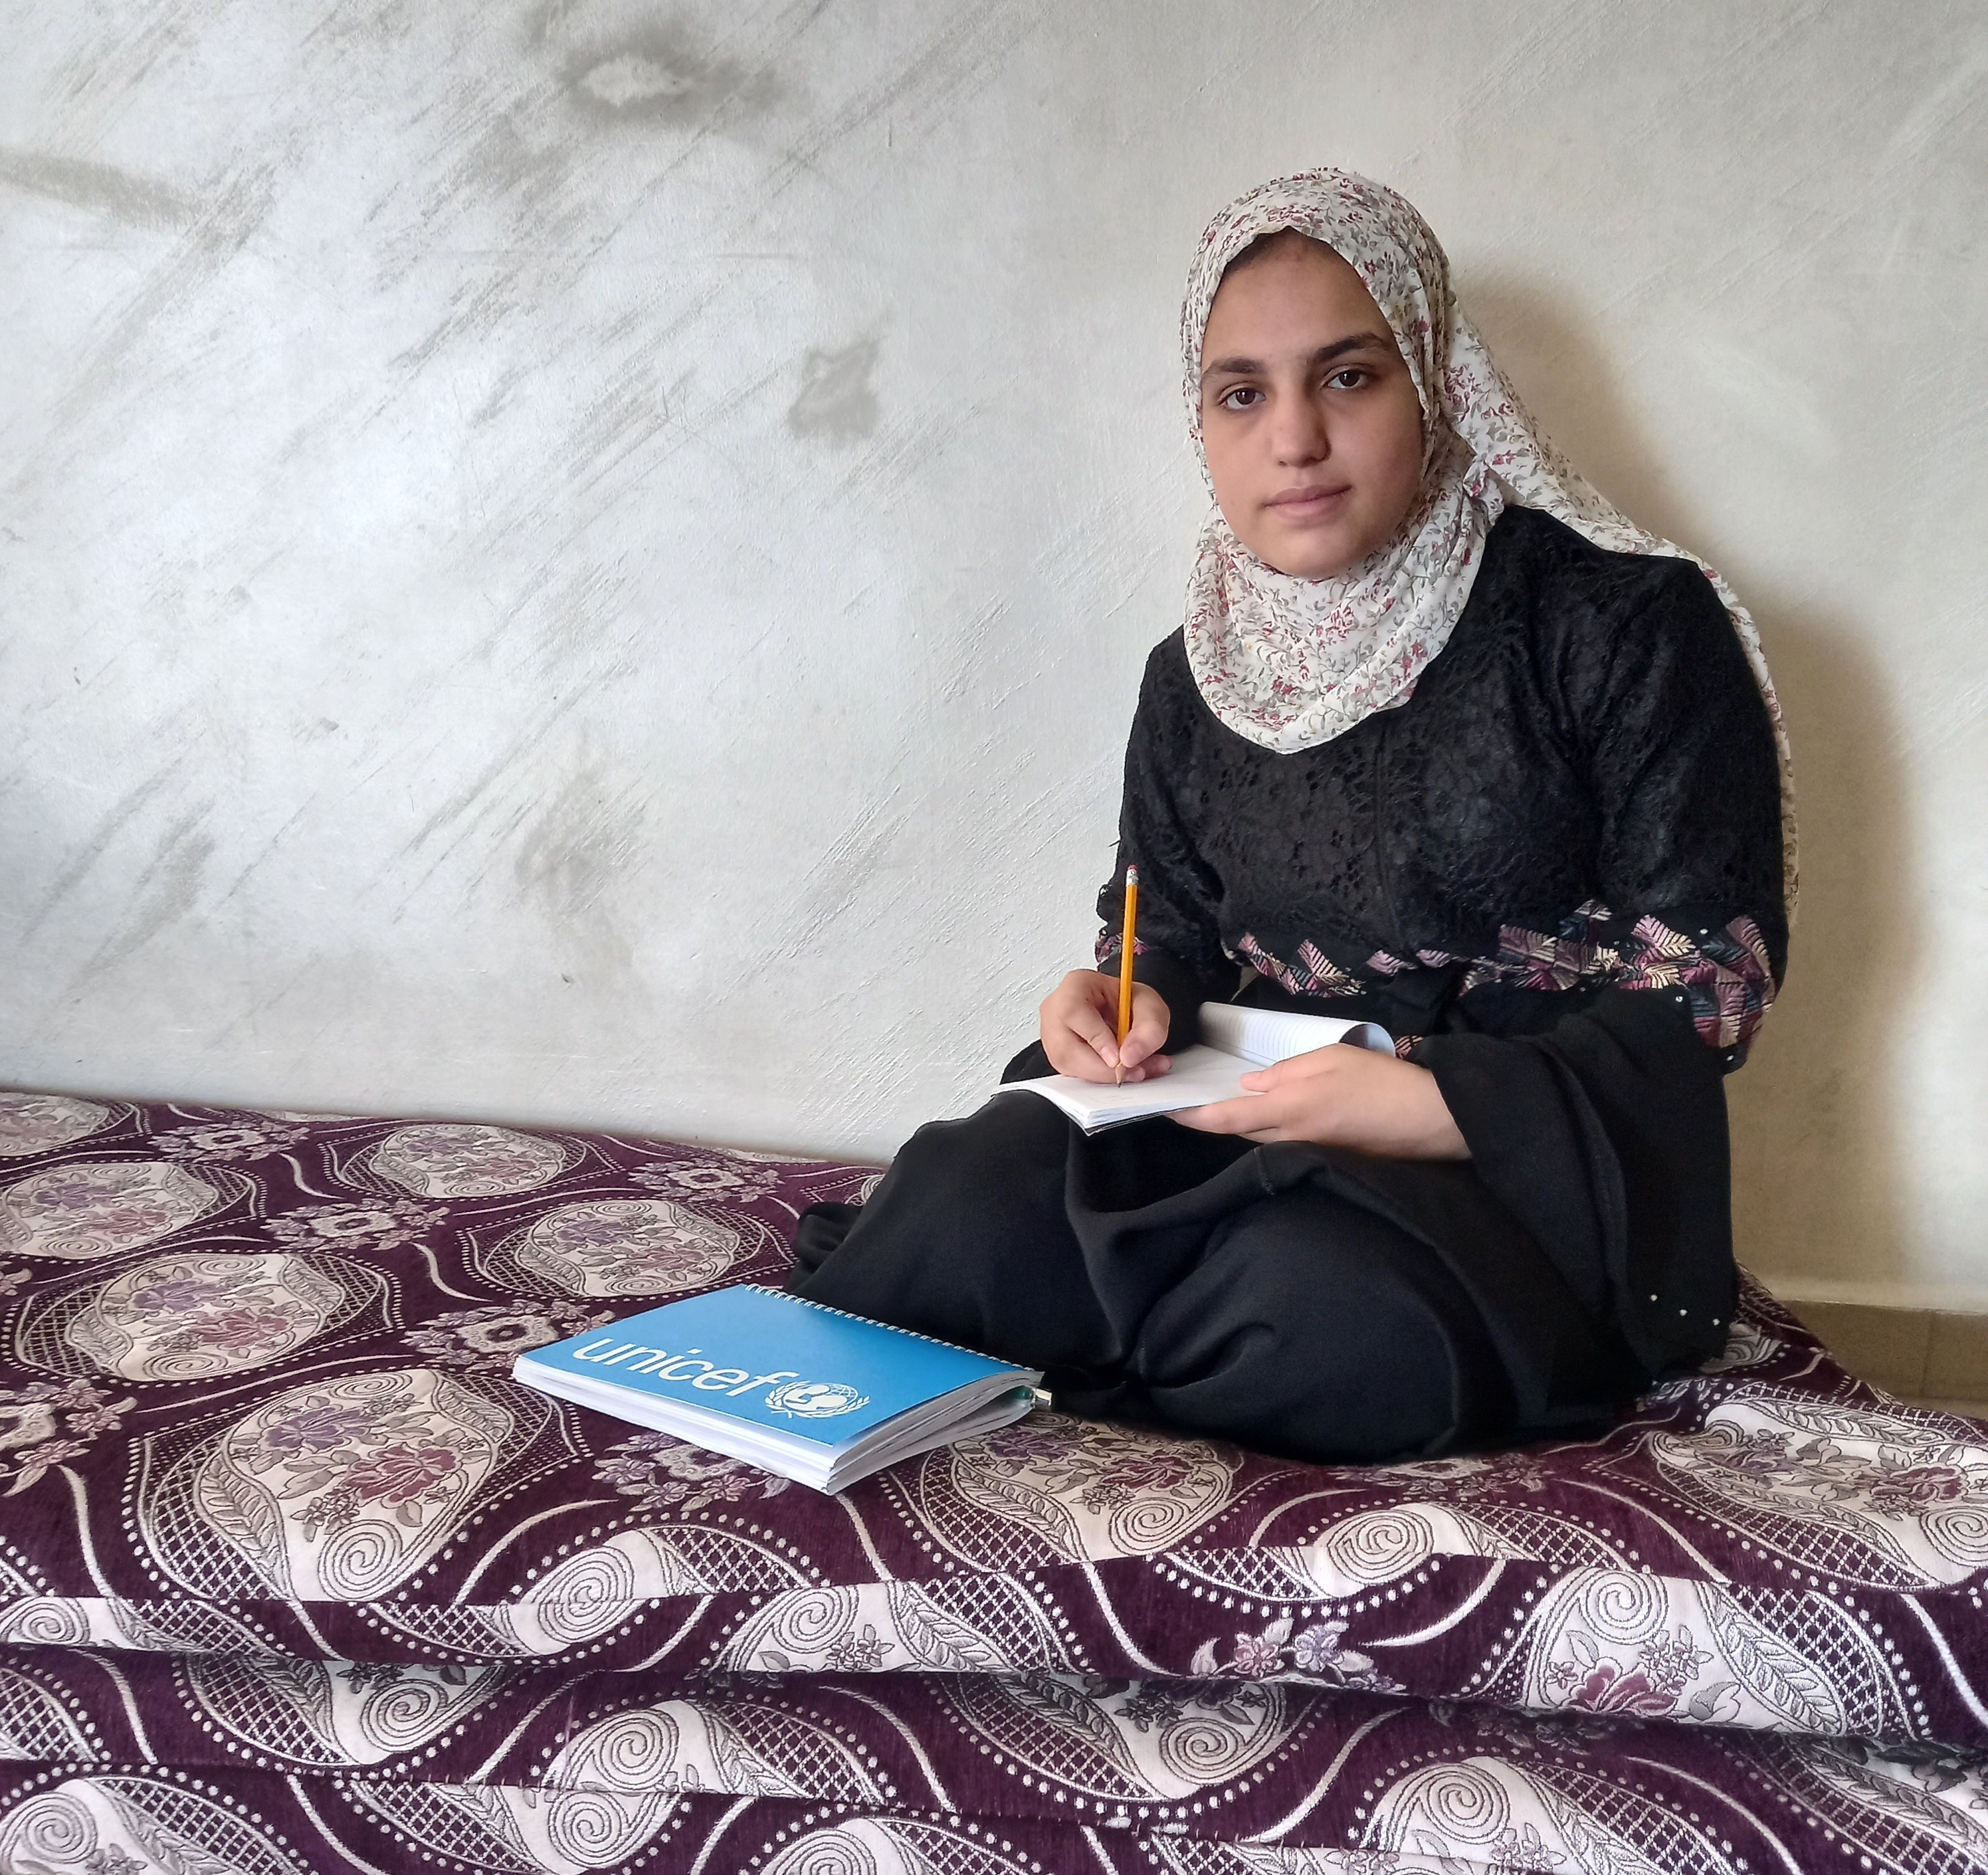 Determined to reimagine a better future - Fadda and her four children